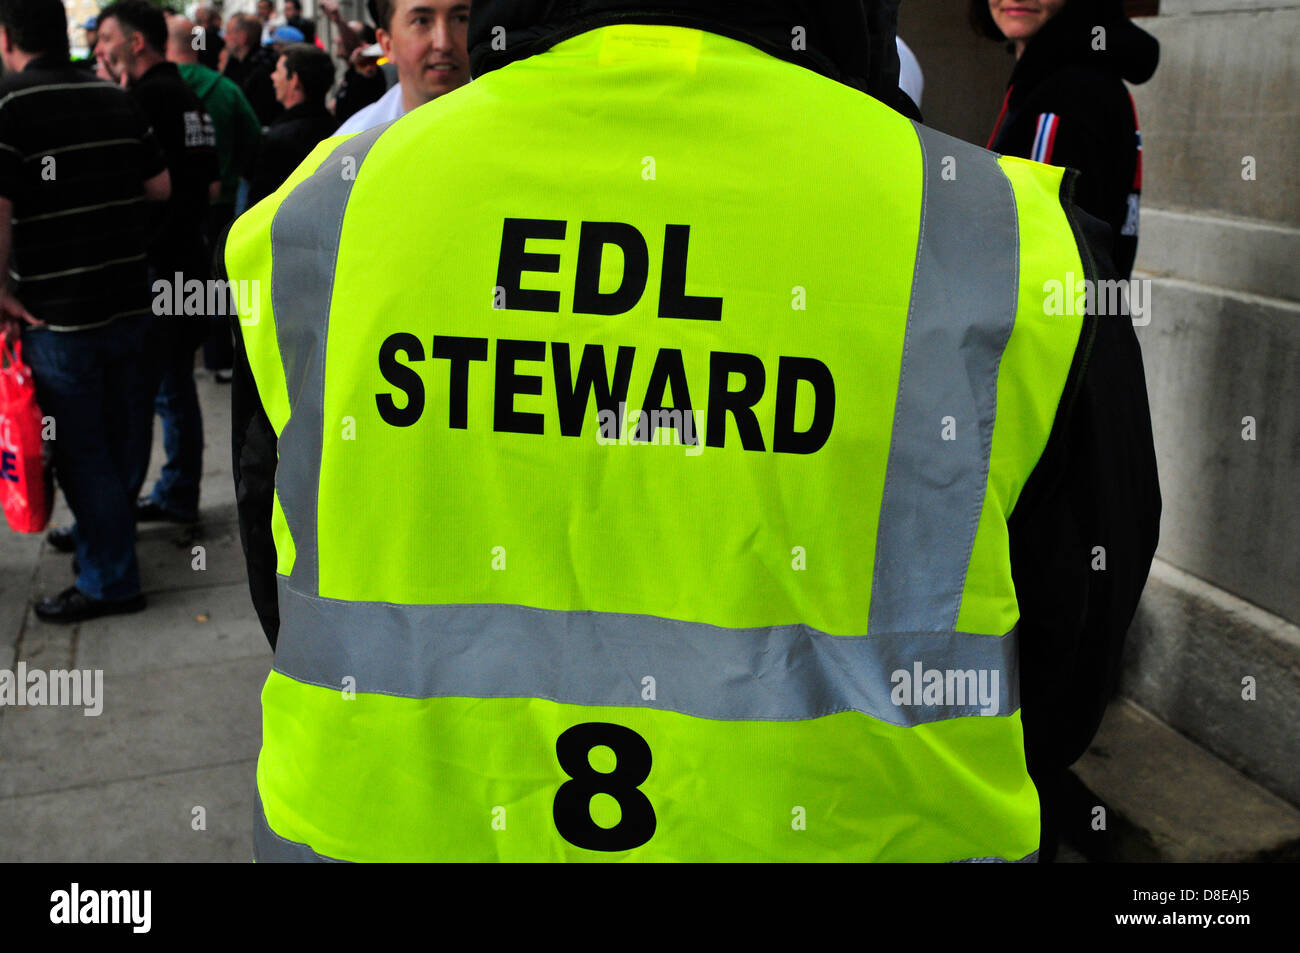 An EDL steward at a protest in London, UK. Stock Photo